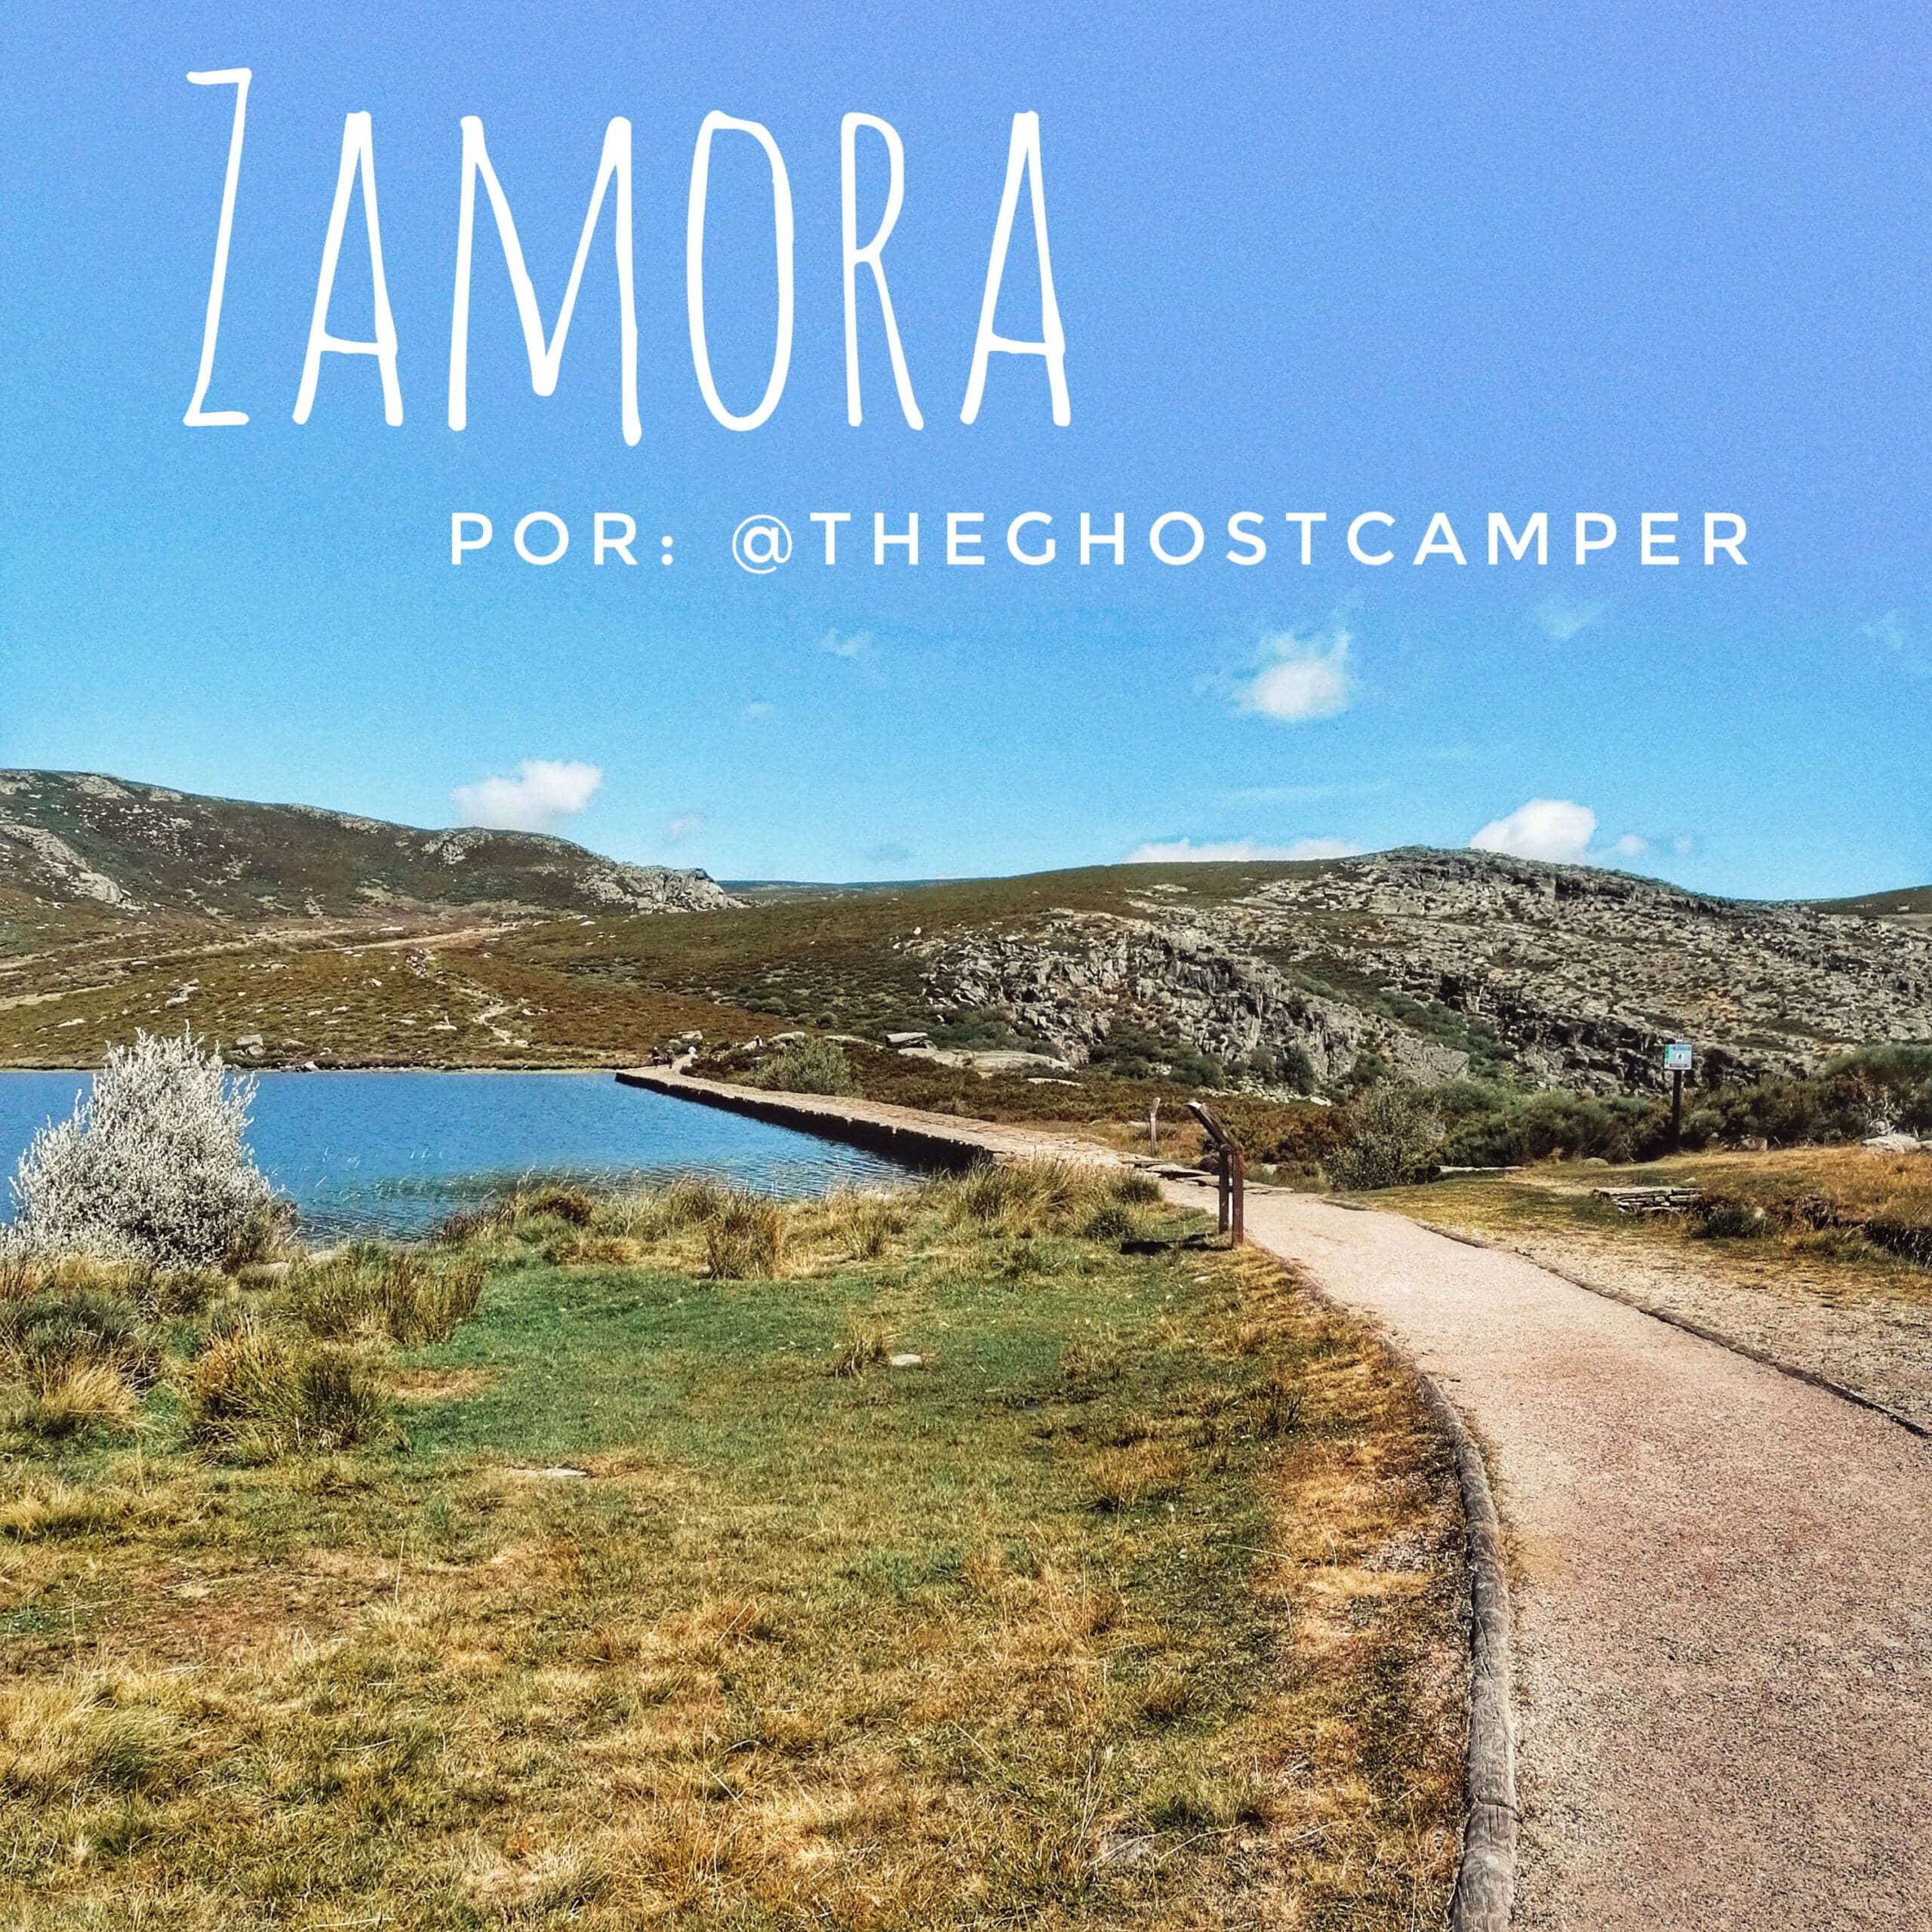 THE 10 BEST Parks & Nature Attractions in Province of Zamora (2023)